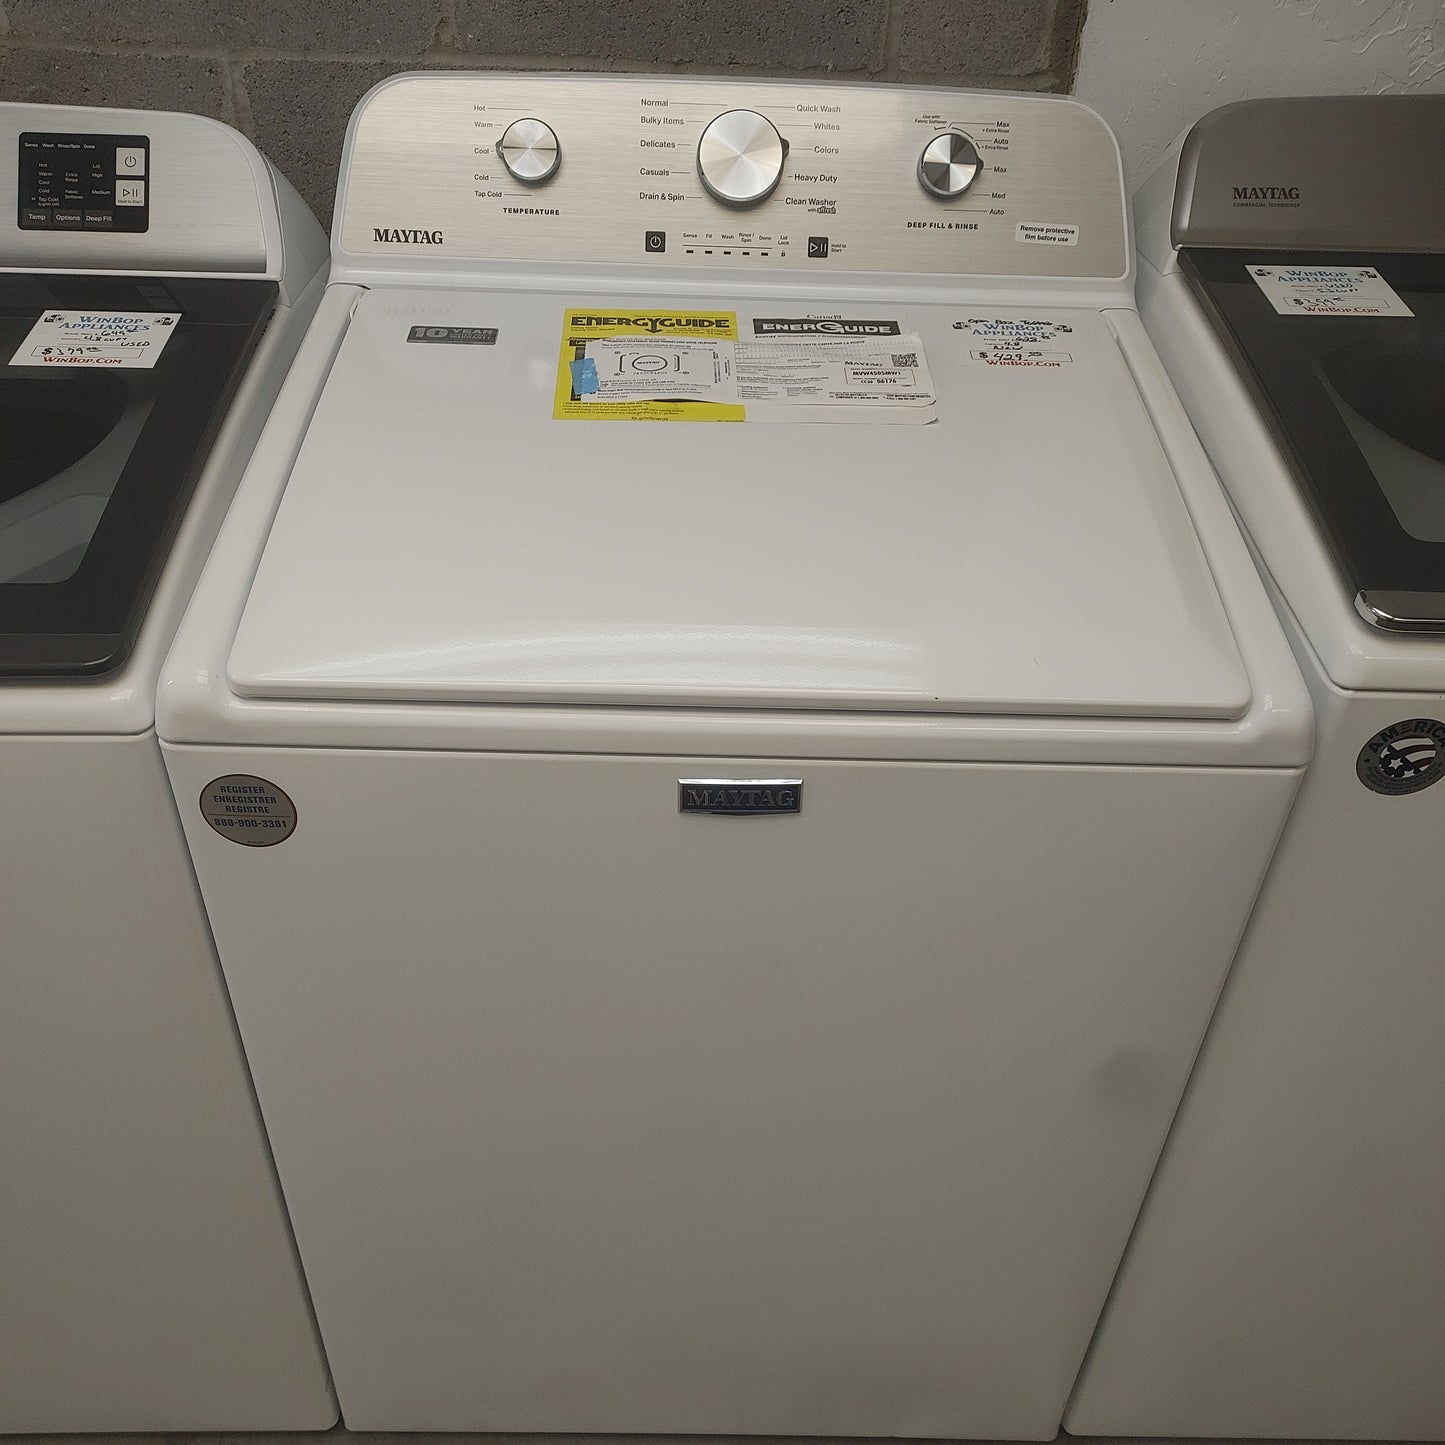 New Maytag 4.8 Cubic Ft Top Load Washer with Agitator